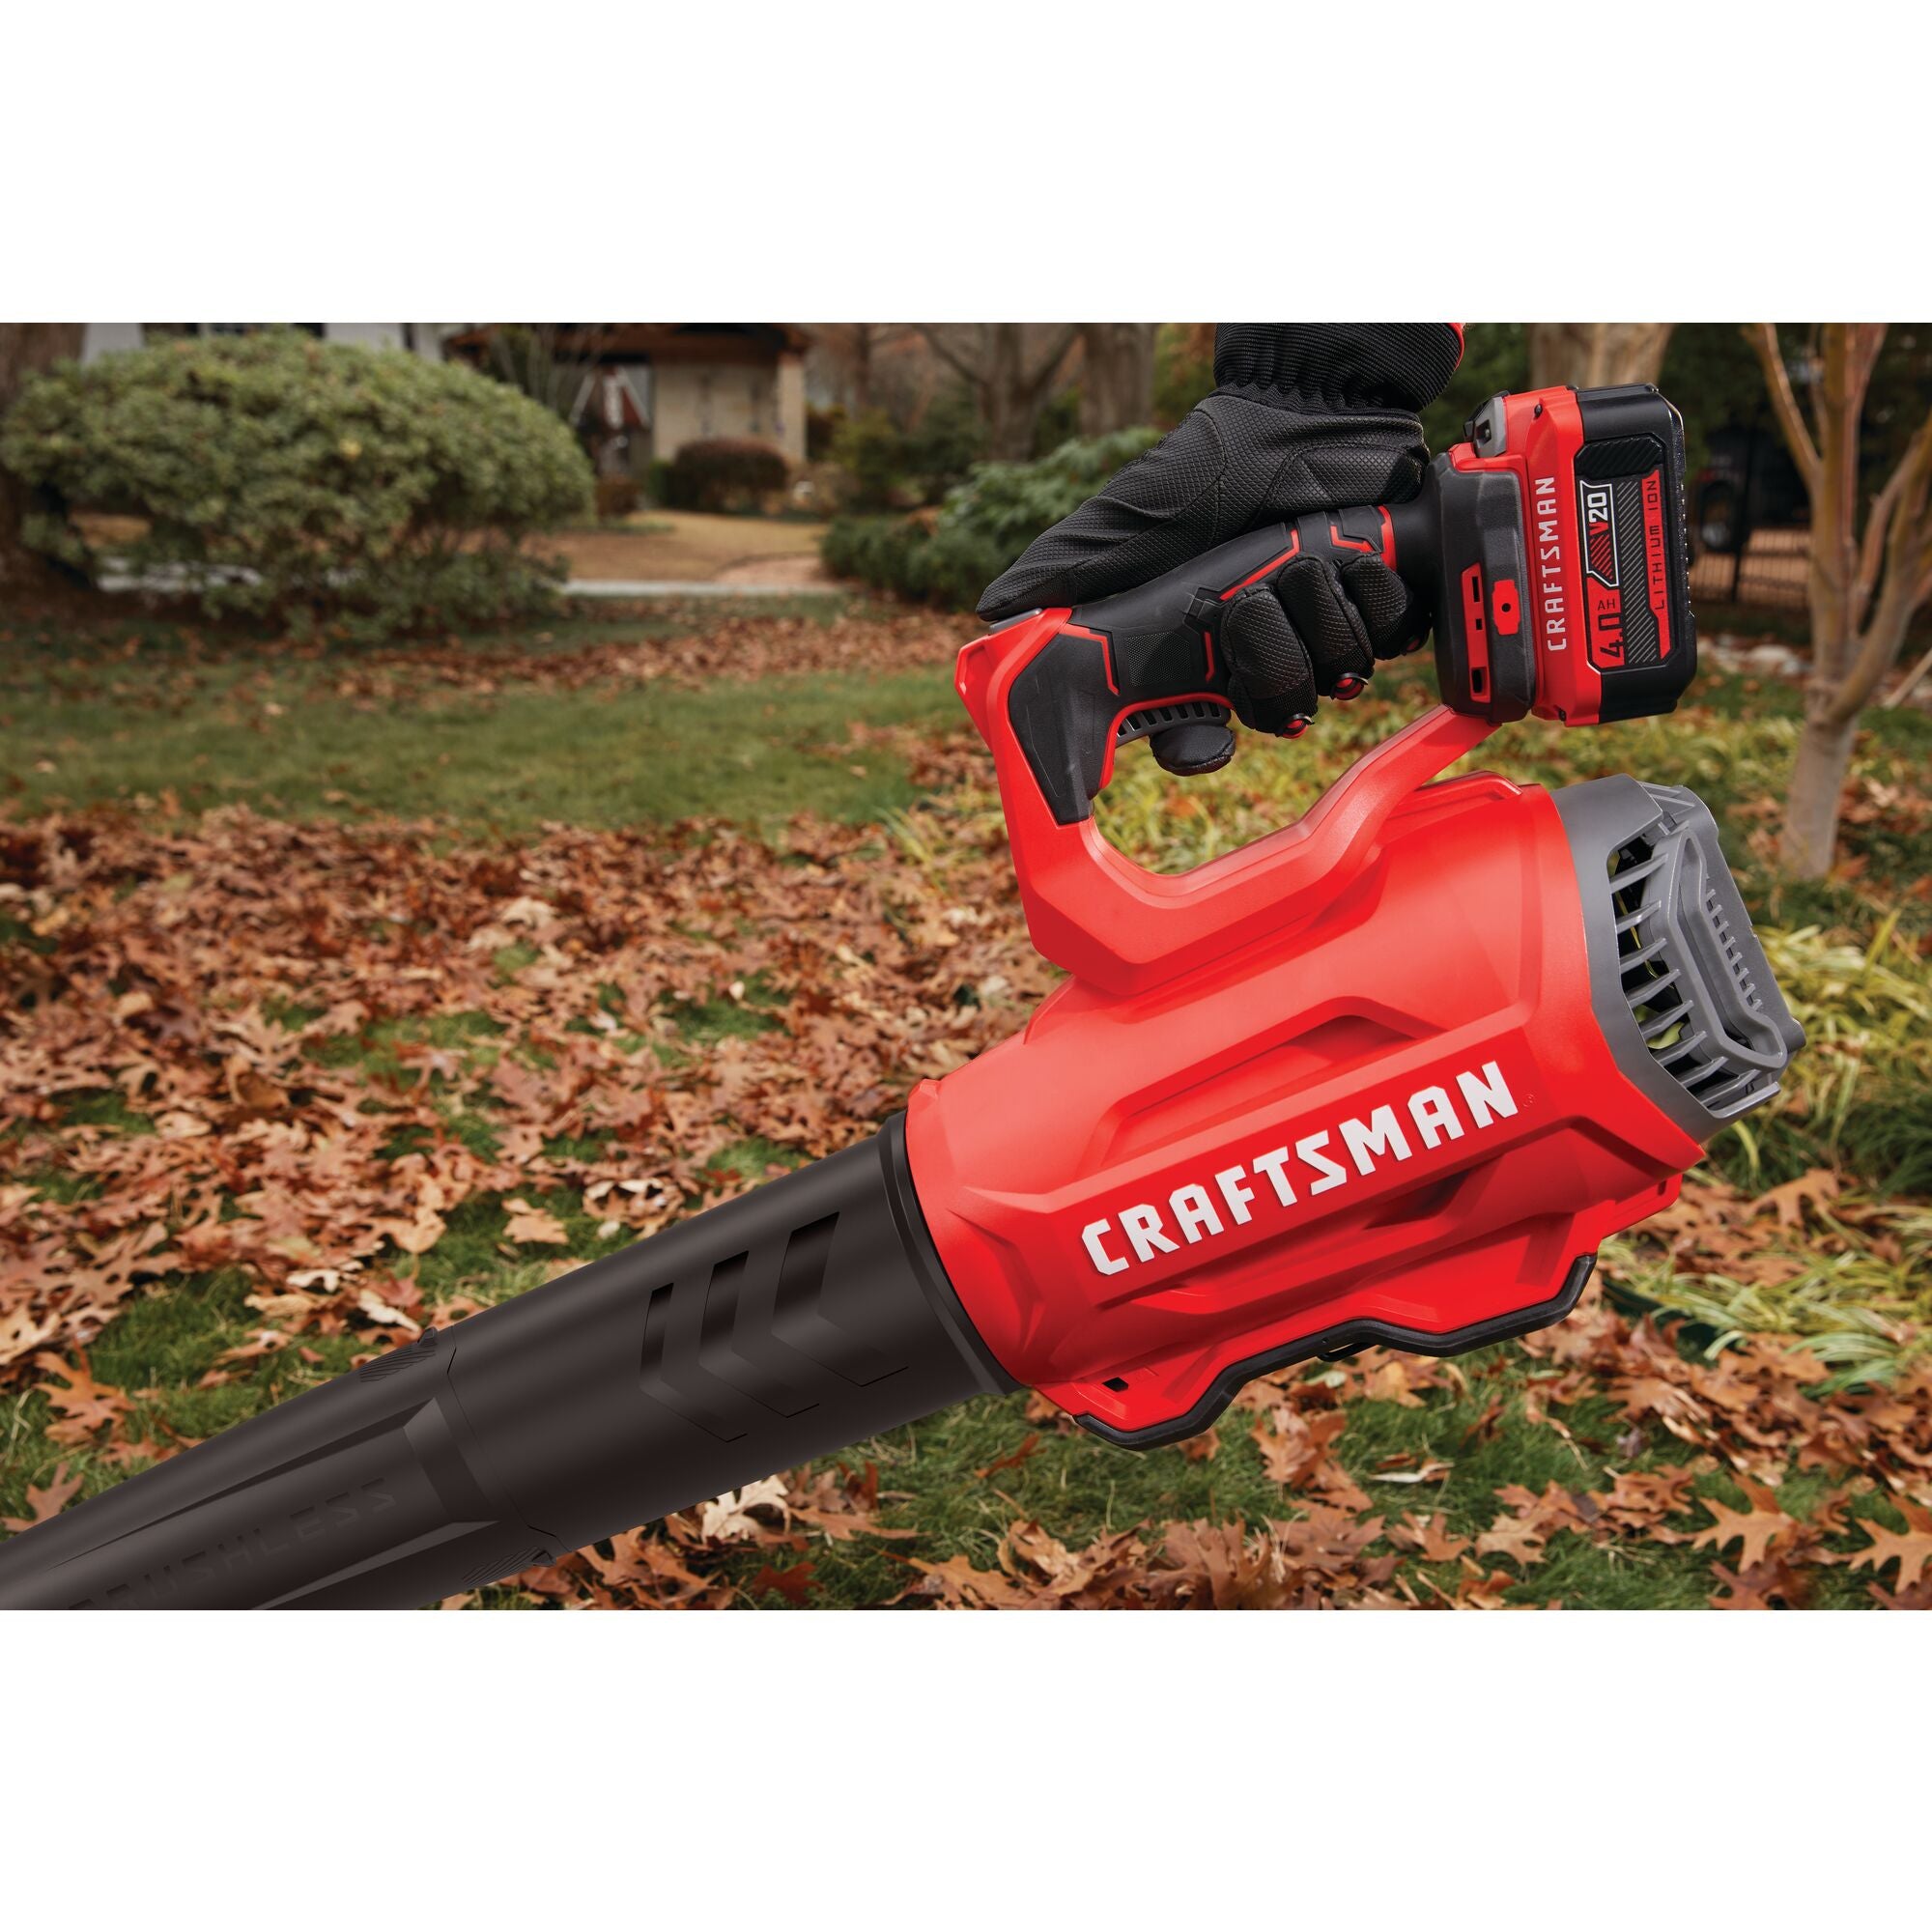 Avid Power Cordless Leaf Blower, 20V MAX Lithium Cordless Sweeper with –  Avid Power Tools